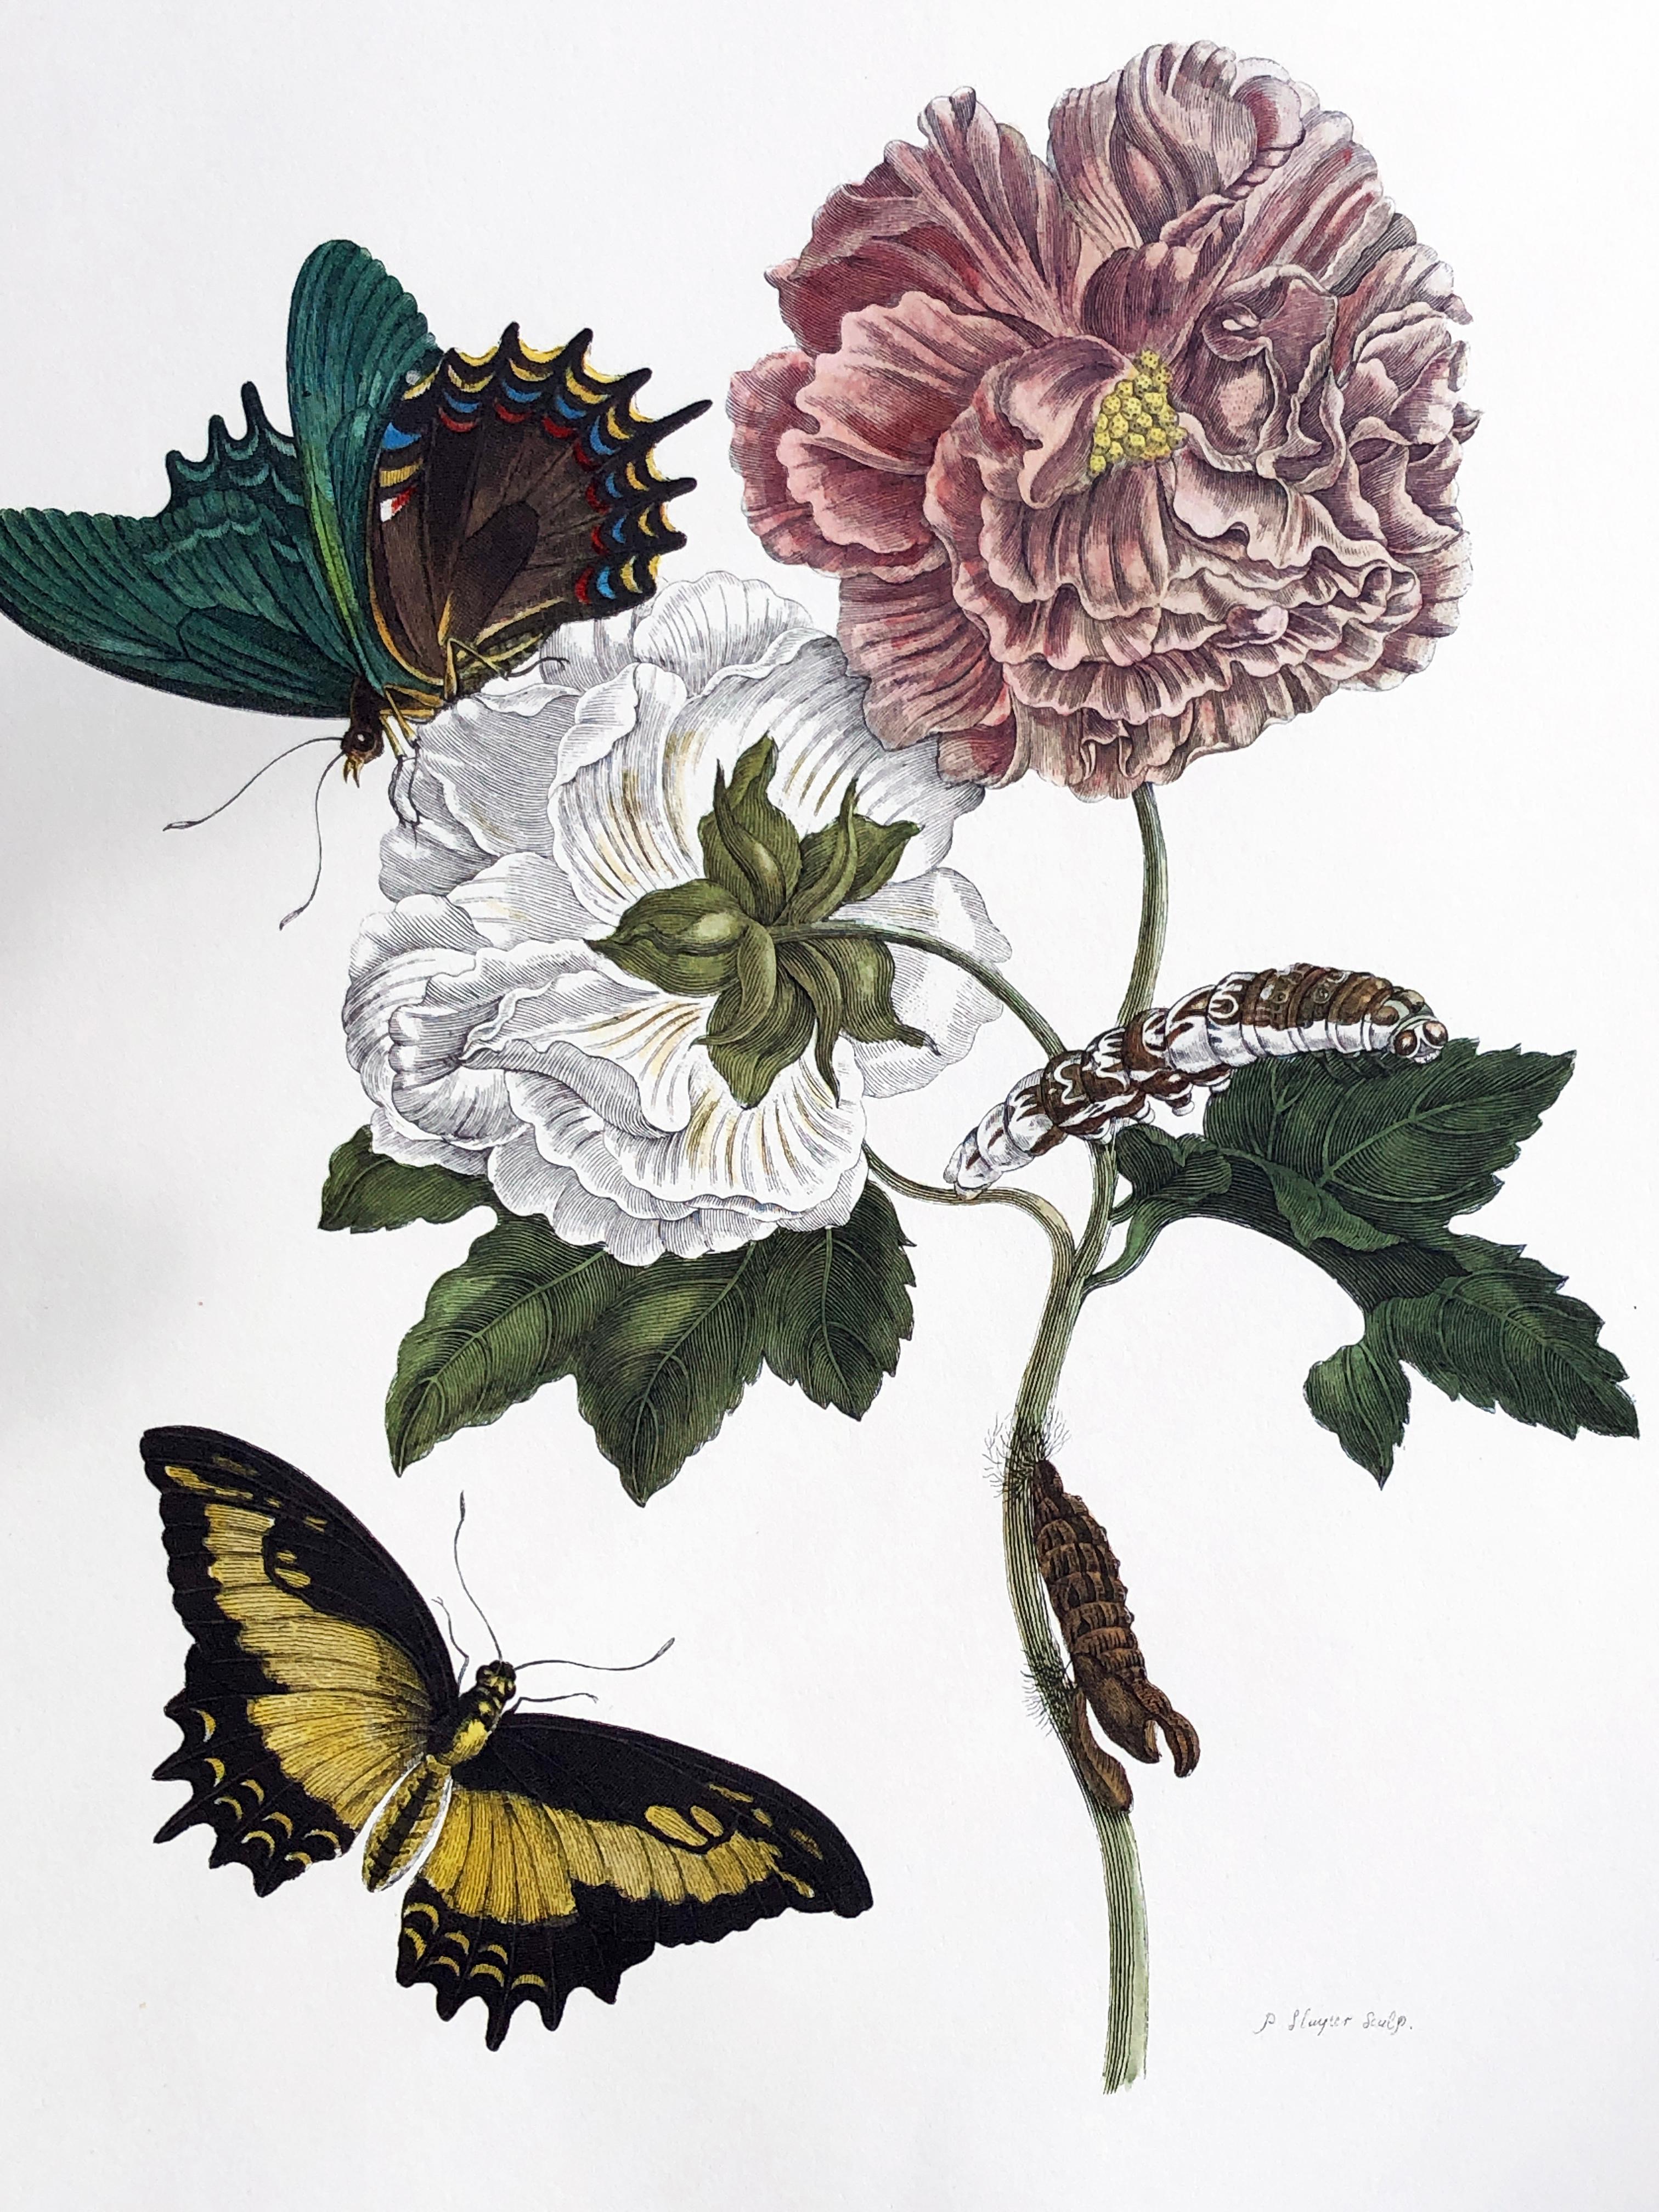 Dutch Maria Sibylla Merian - P. Sluyter - Hibiscus flowers and swallowtail Nr.31 For Sale